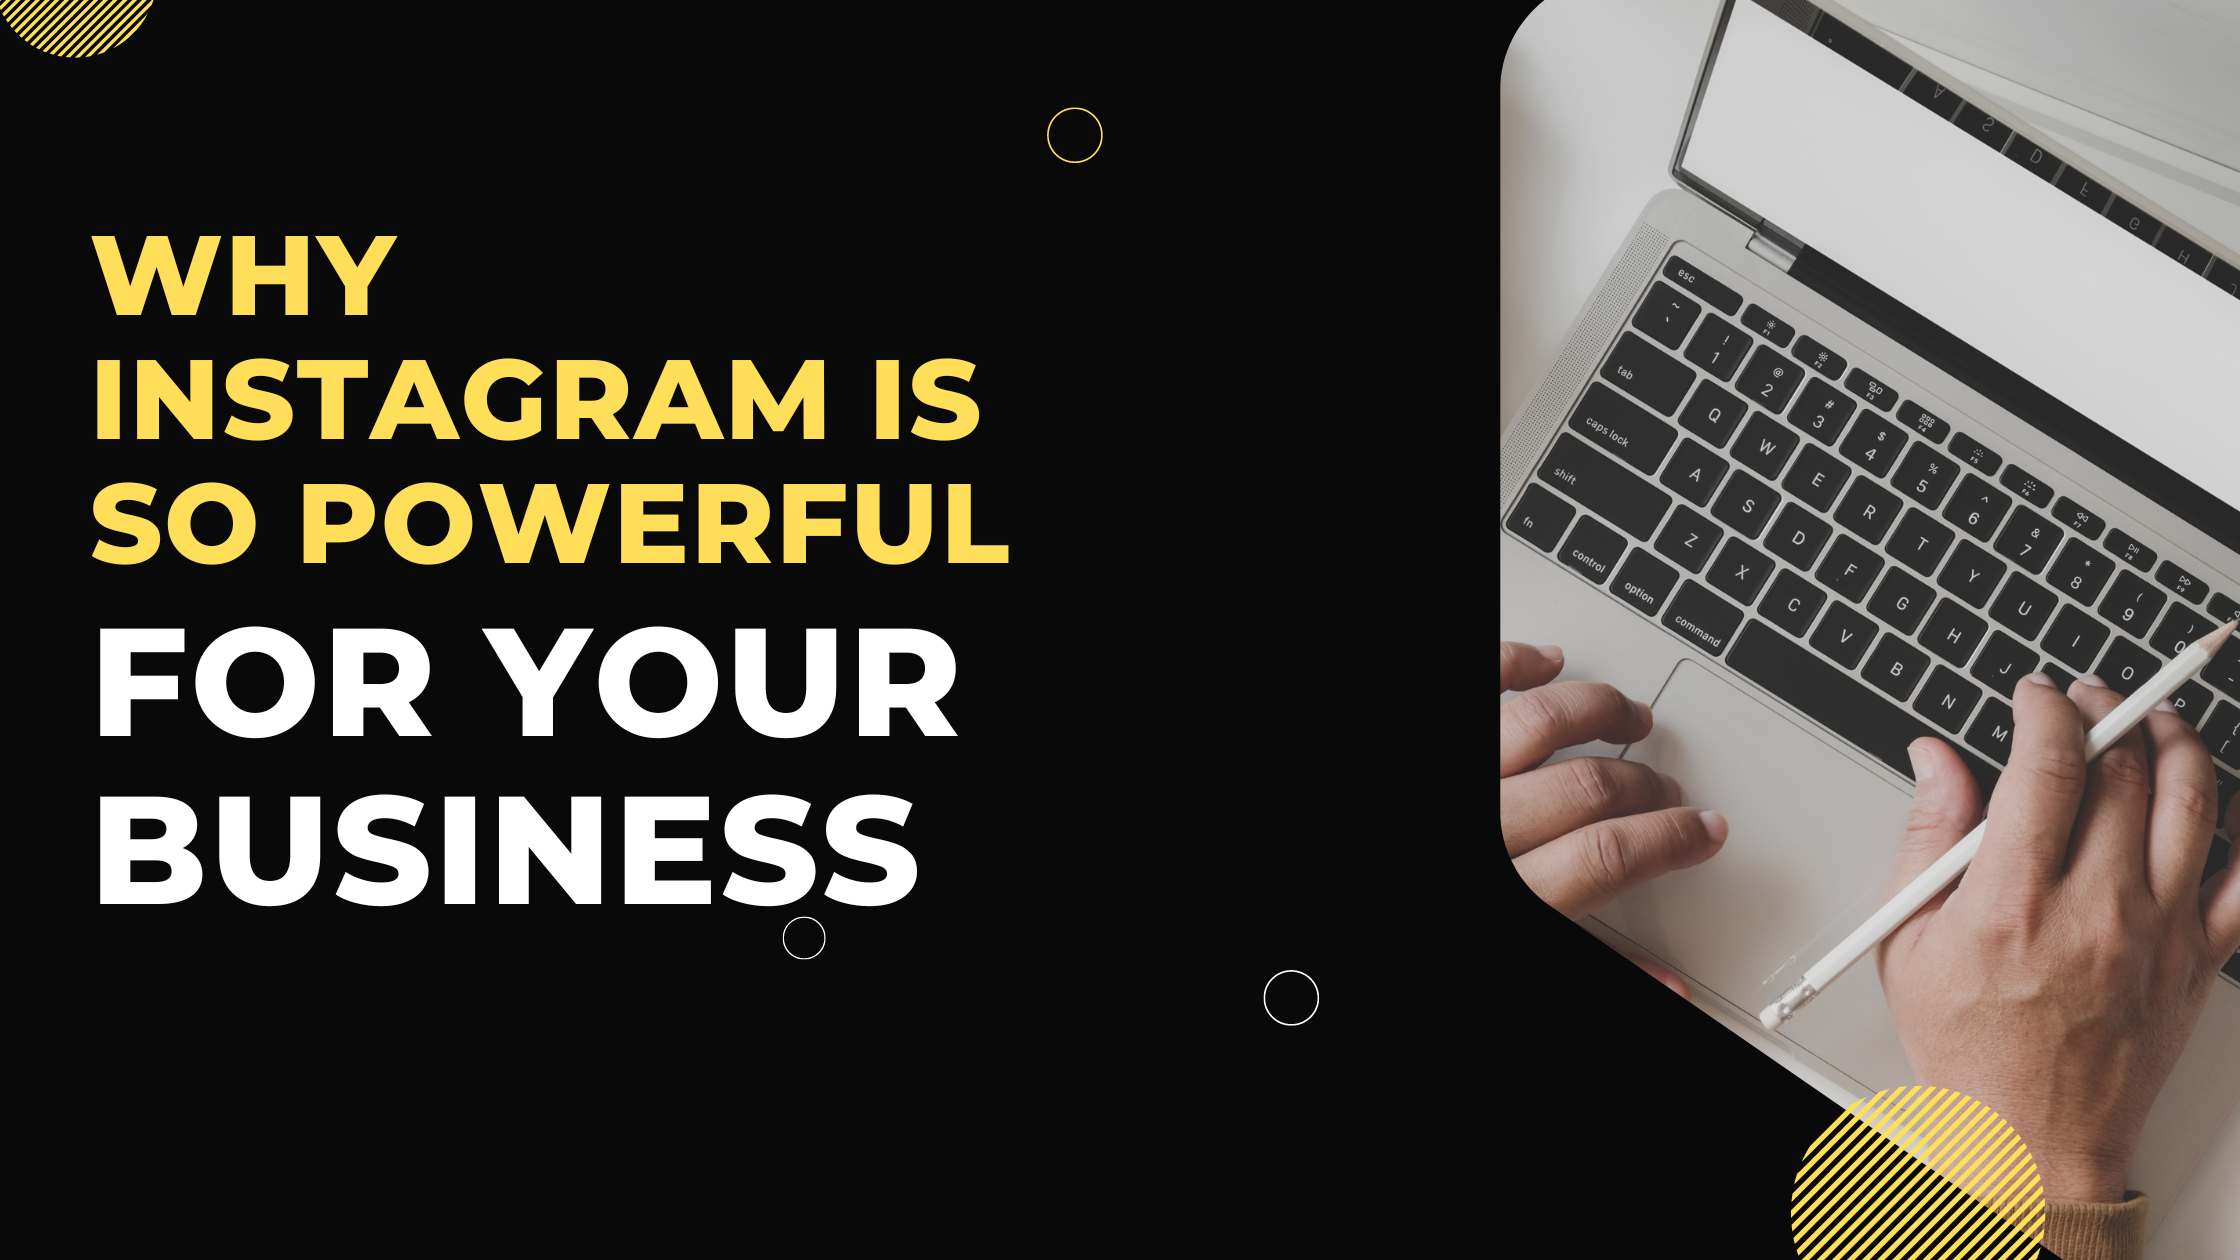 Why Instagram Is So Powerful for Your Business